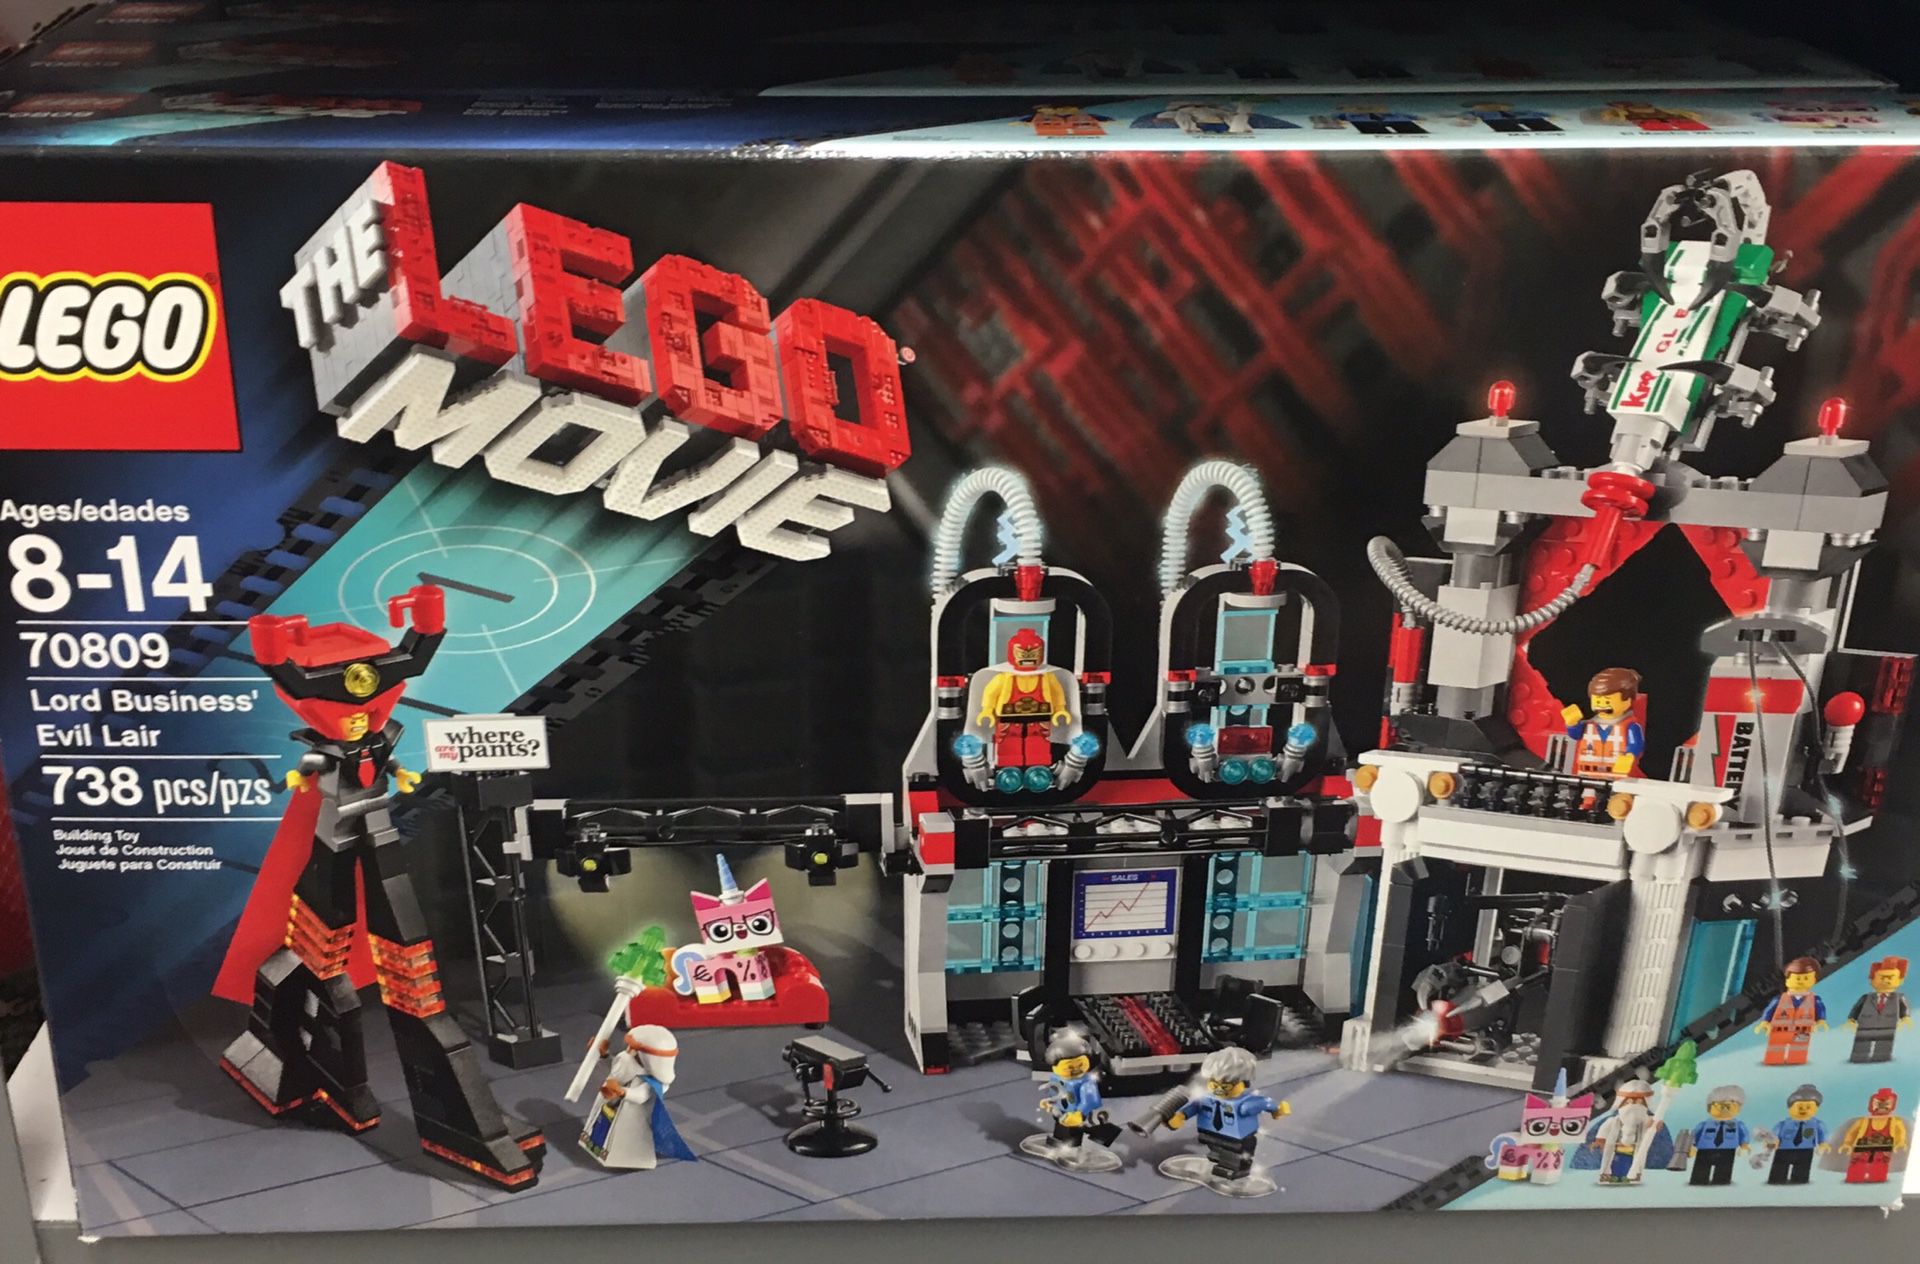 Lego 70809 Lord Business Evil Lair, new